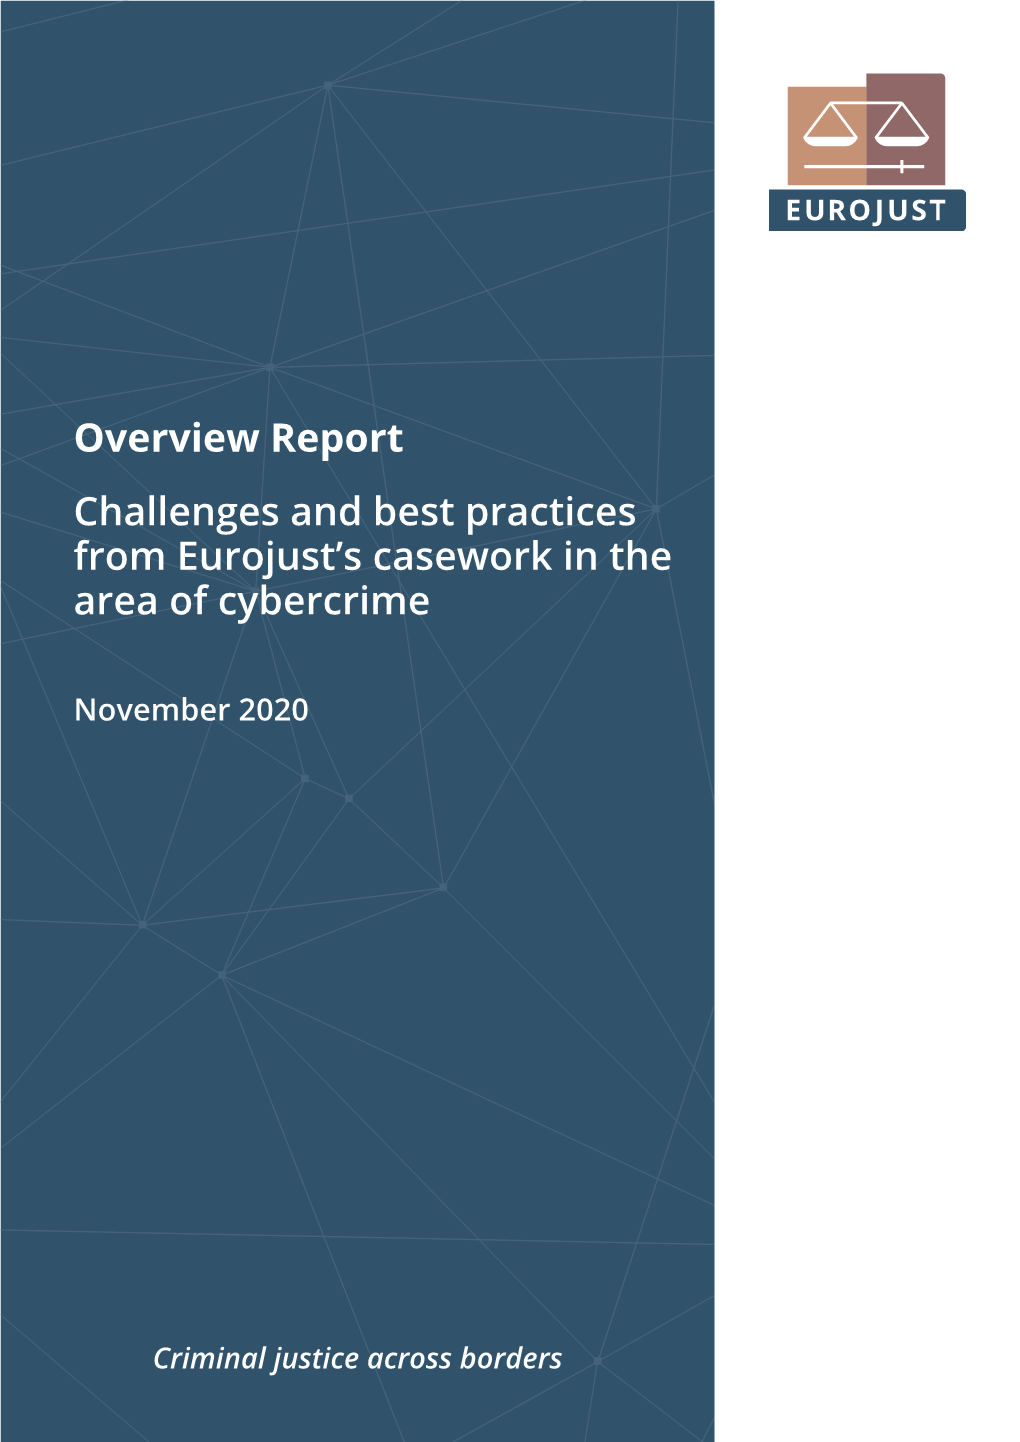 Overview Report Challenges and Best Practices from Eurojust's Casework